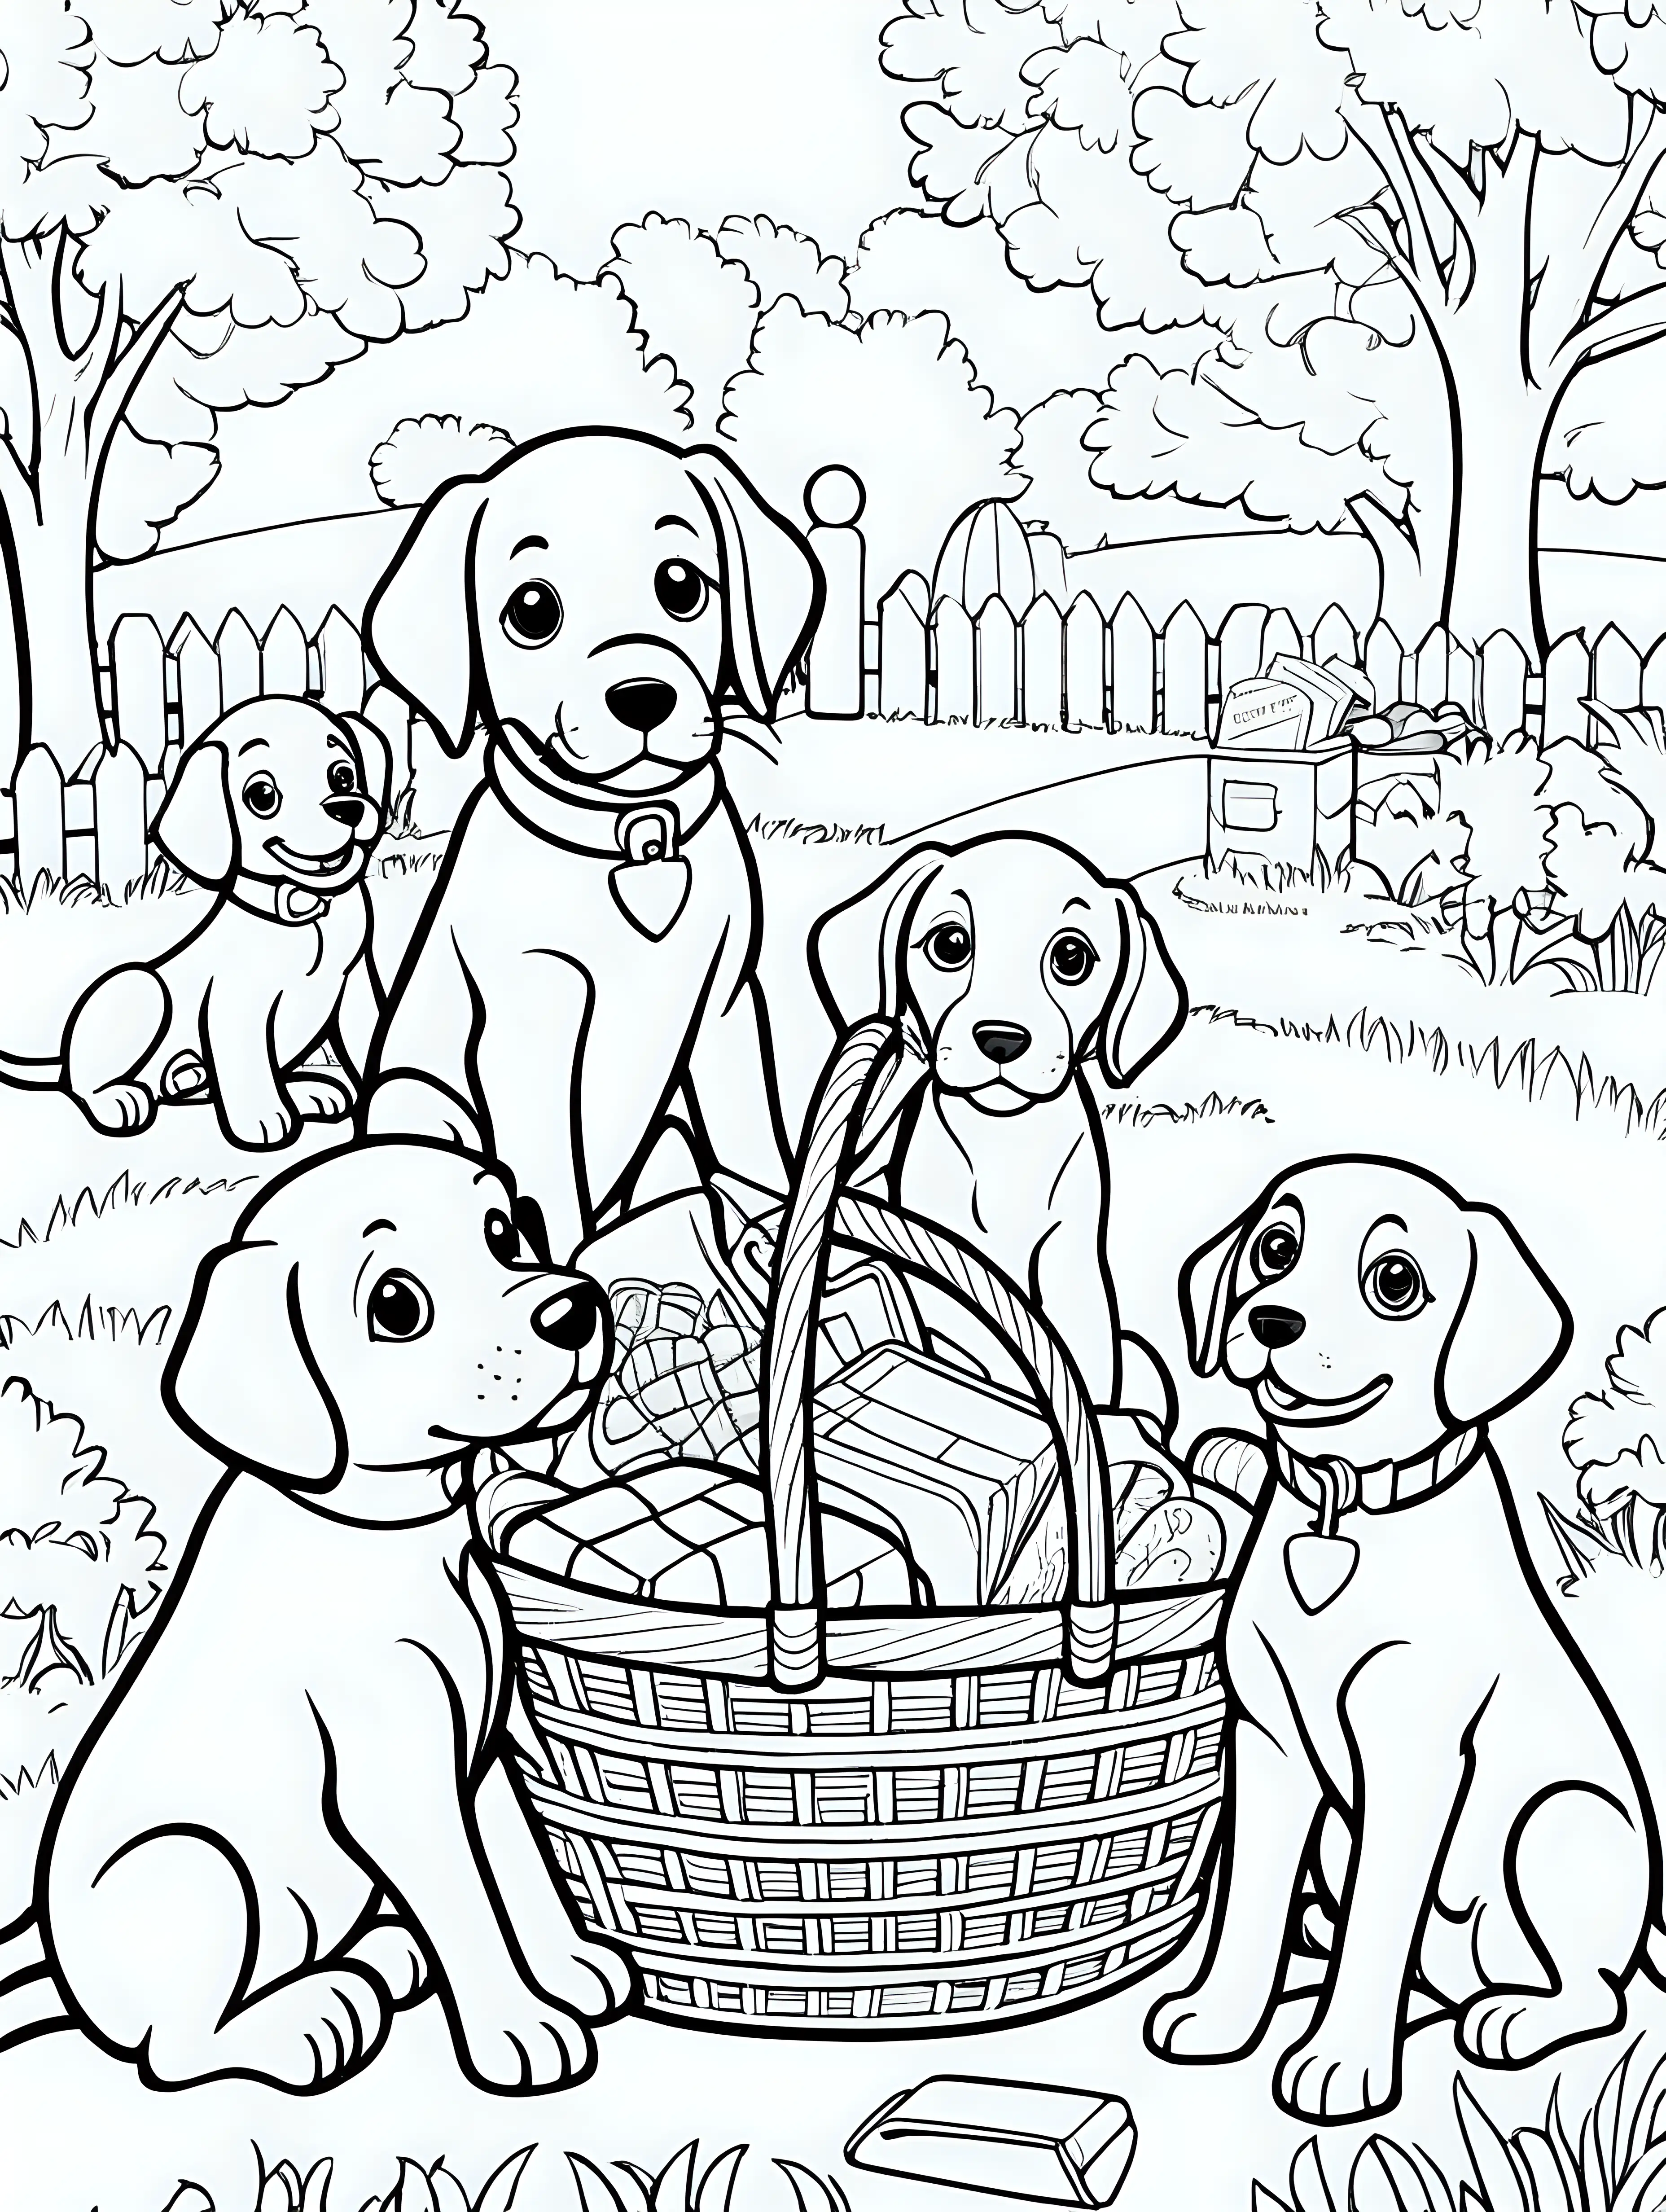 Puppies Picnic Coloring Page for Kids | MUSE AI